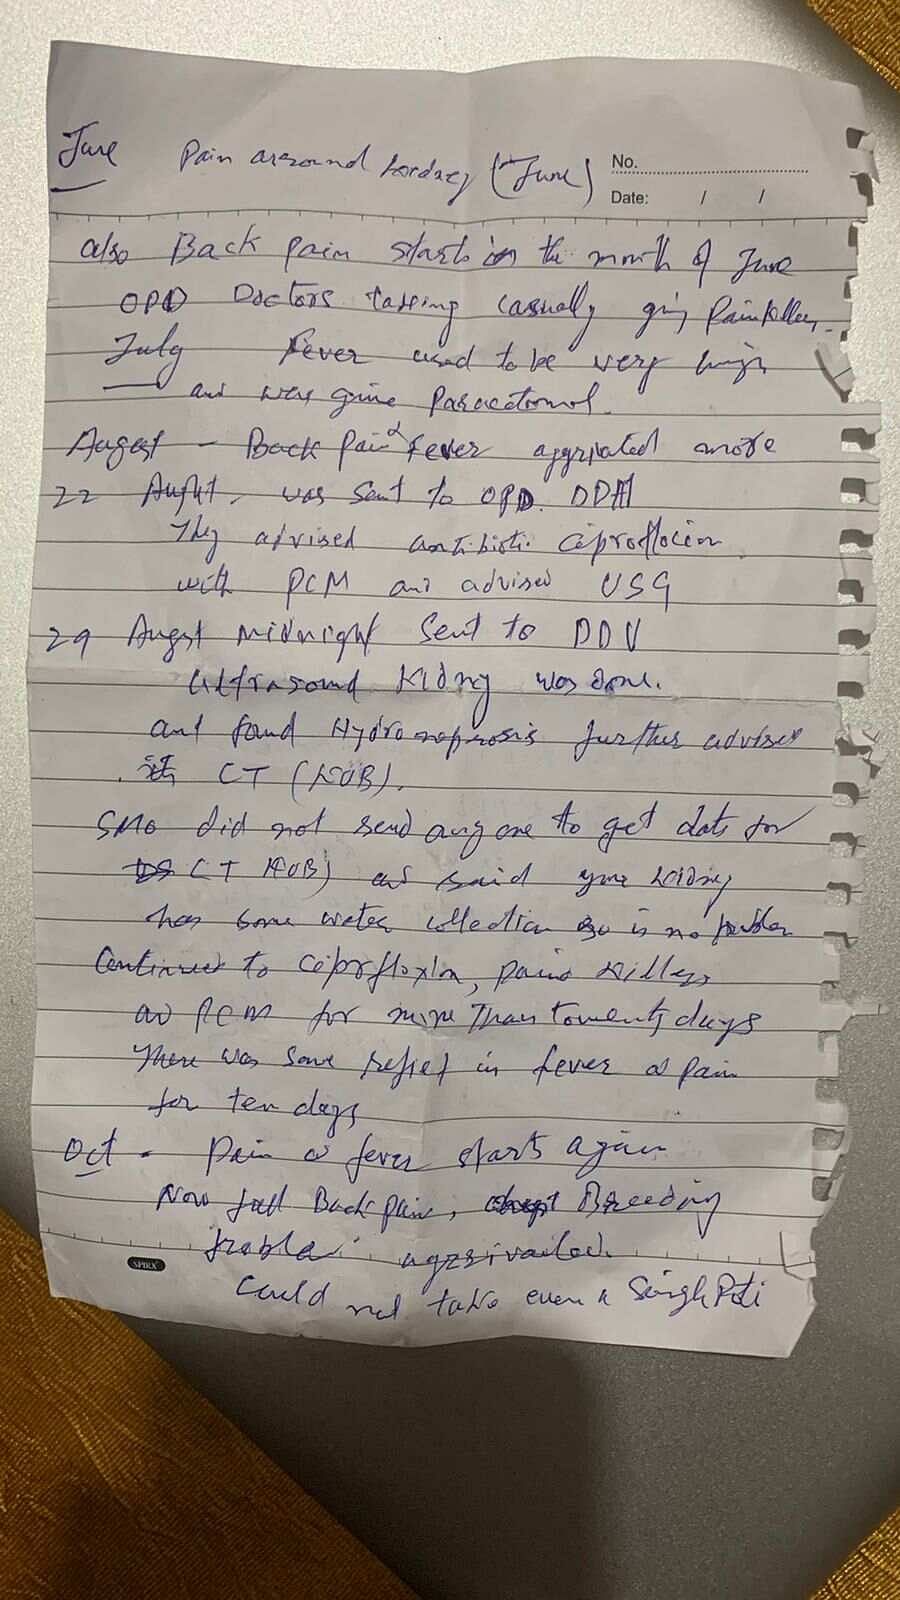 Altaf Ahmad Shah's handwritten notes about his health | By special arrangement 